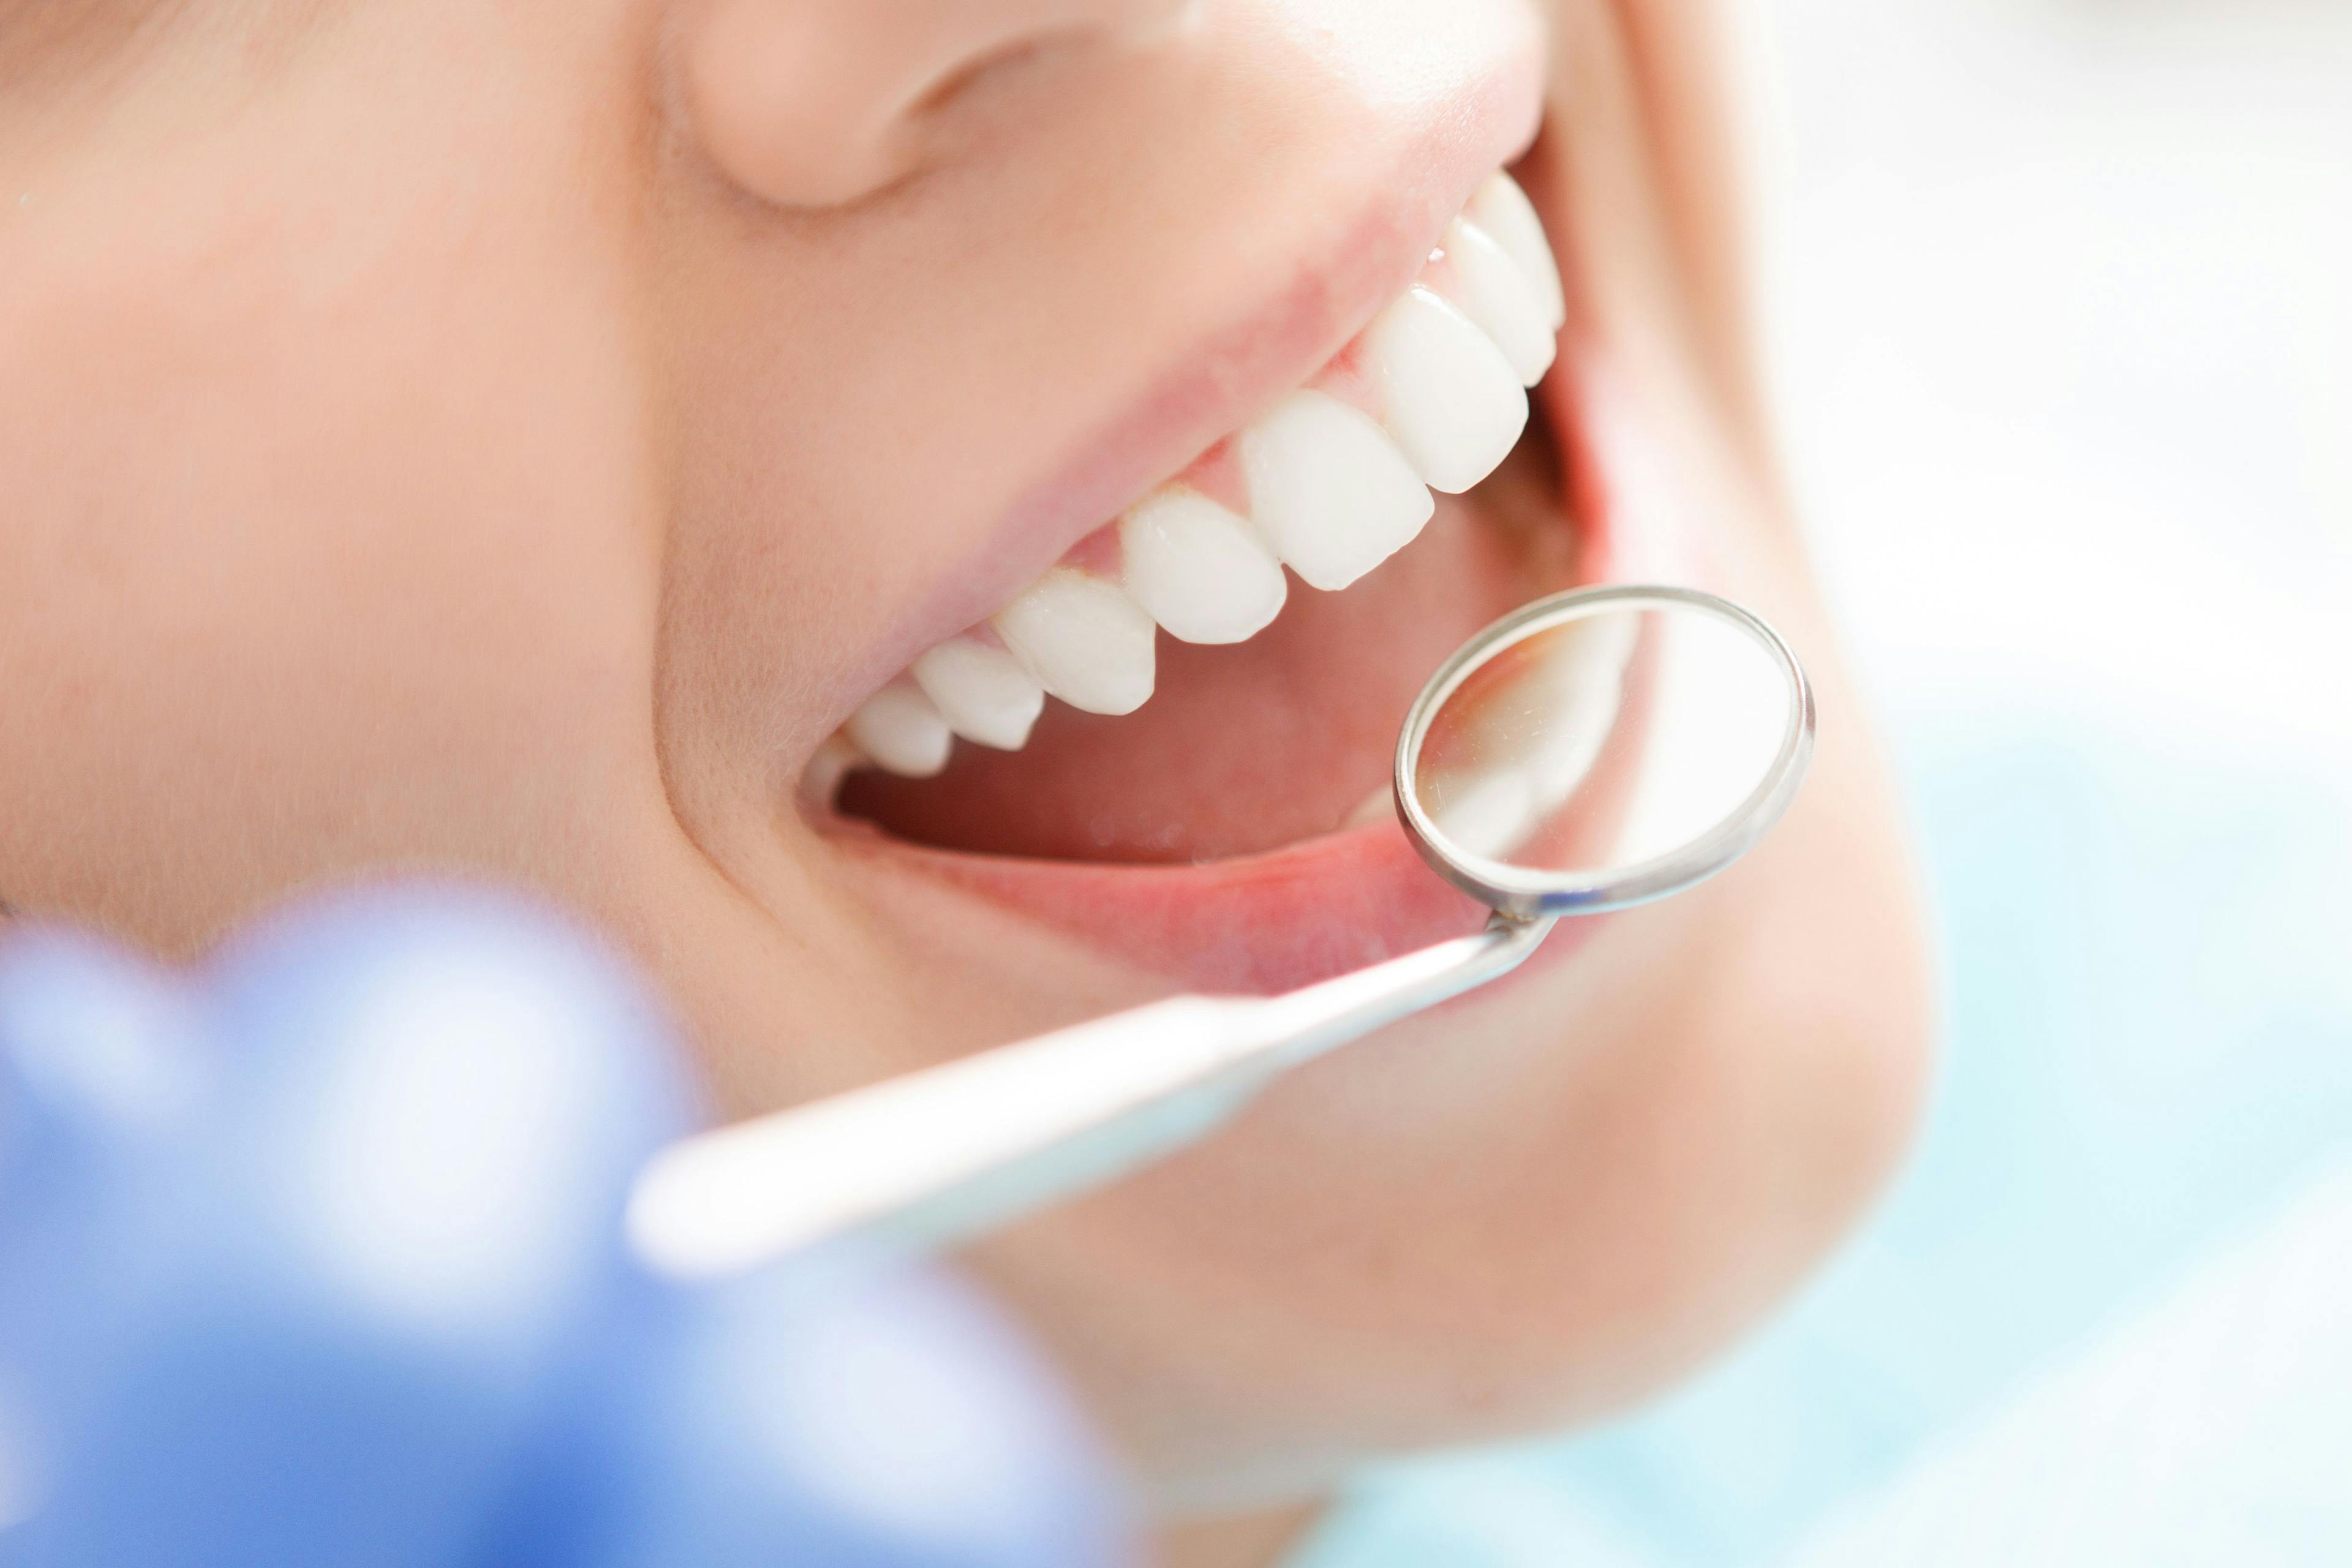 woman at dentist, close-up of teeth with dental tool